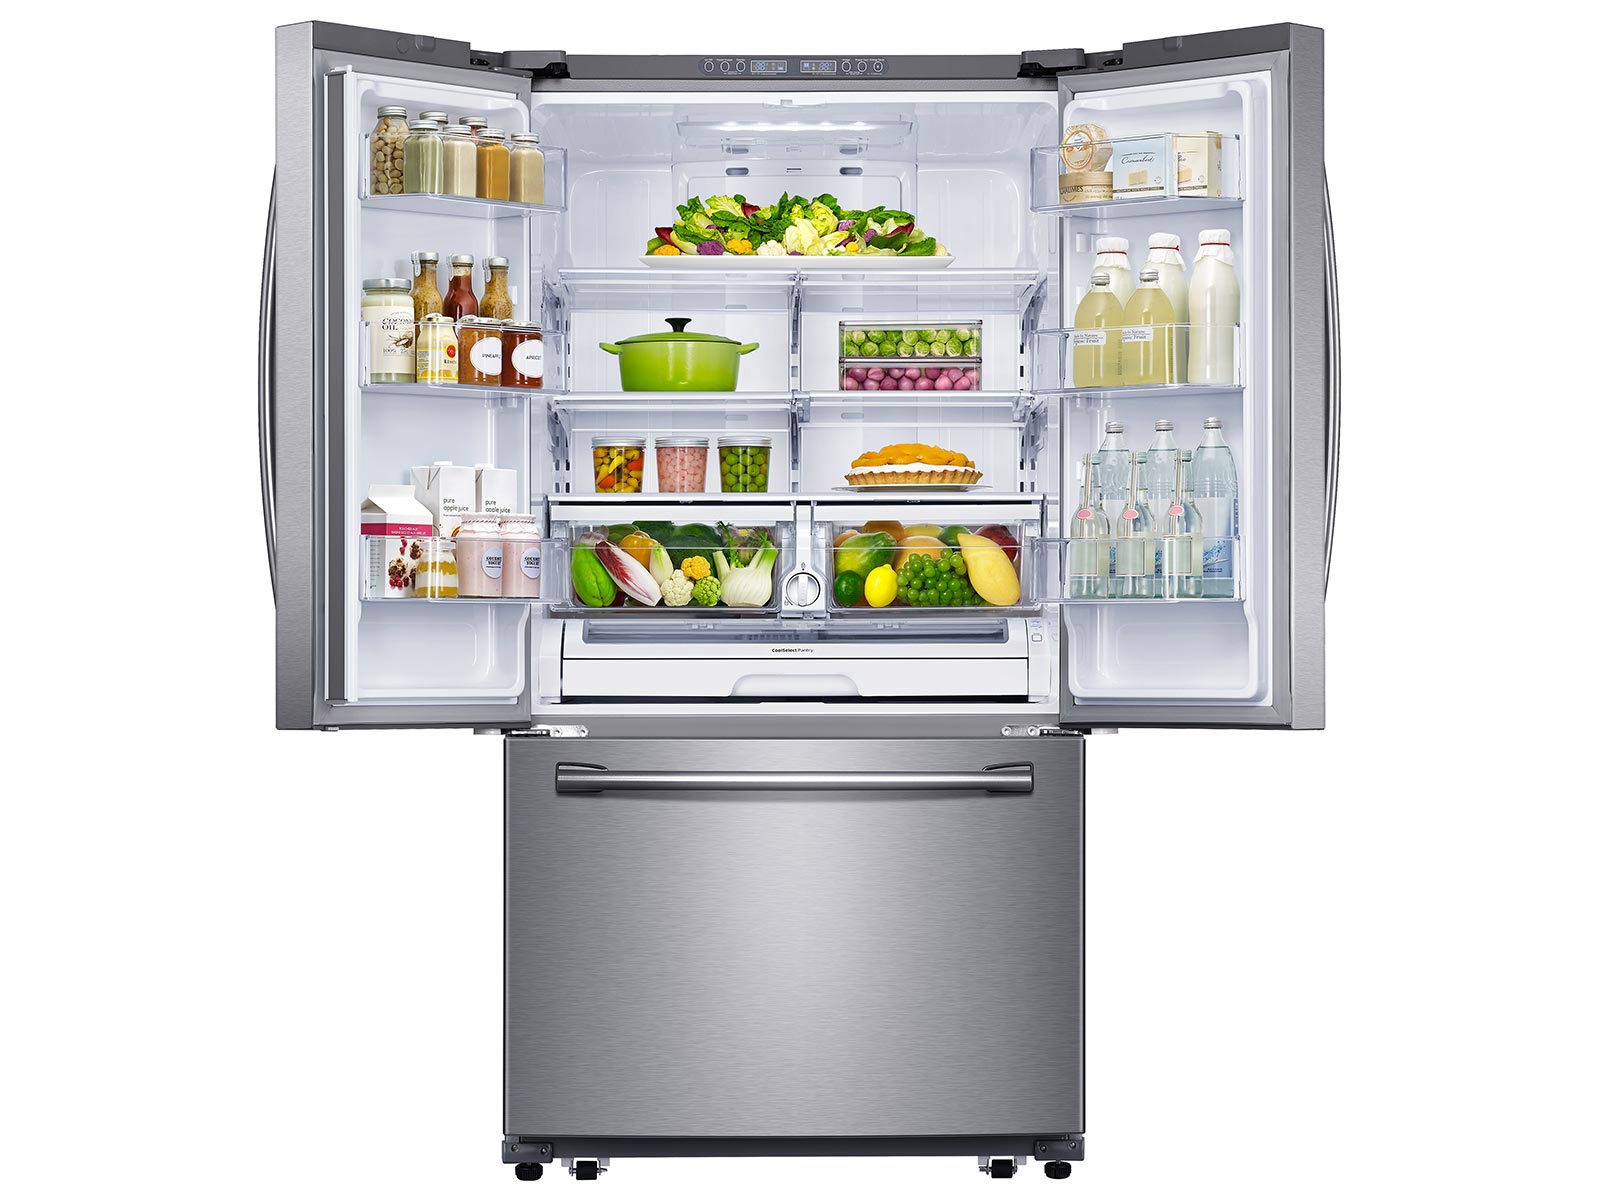 https://image-us.samsung.com/SamsungUS/home/home-appliances/refrigerators/all/pdp/rf260beaes/03_Refrigerator_French-Door_RF260BEAESR_Front_Top_Doors_Open_Food_Silver.jpg?$product-details-jpg$